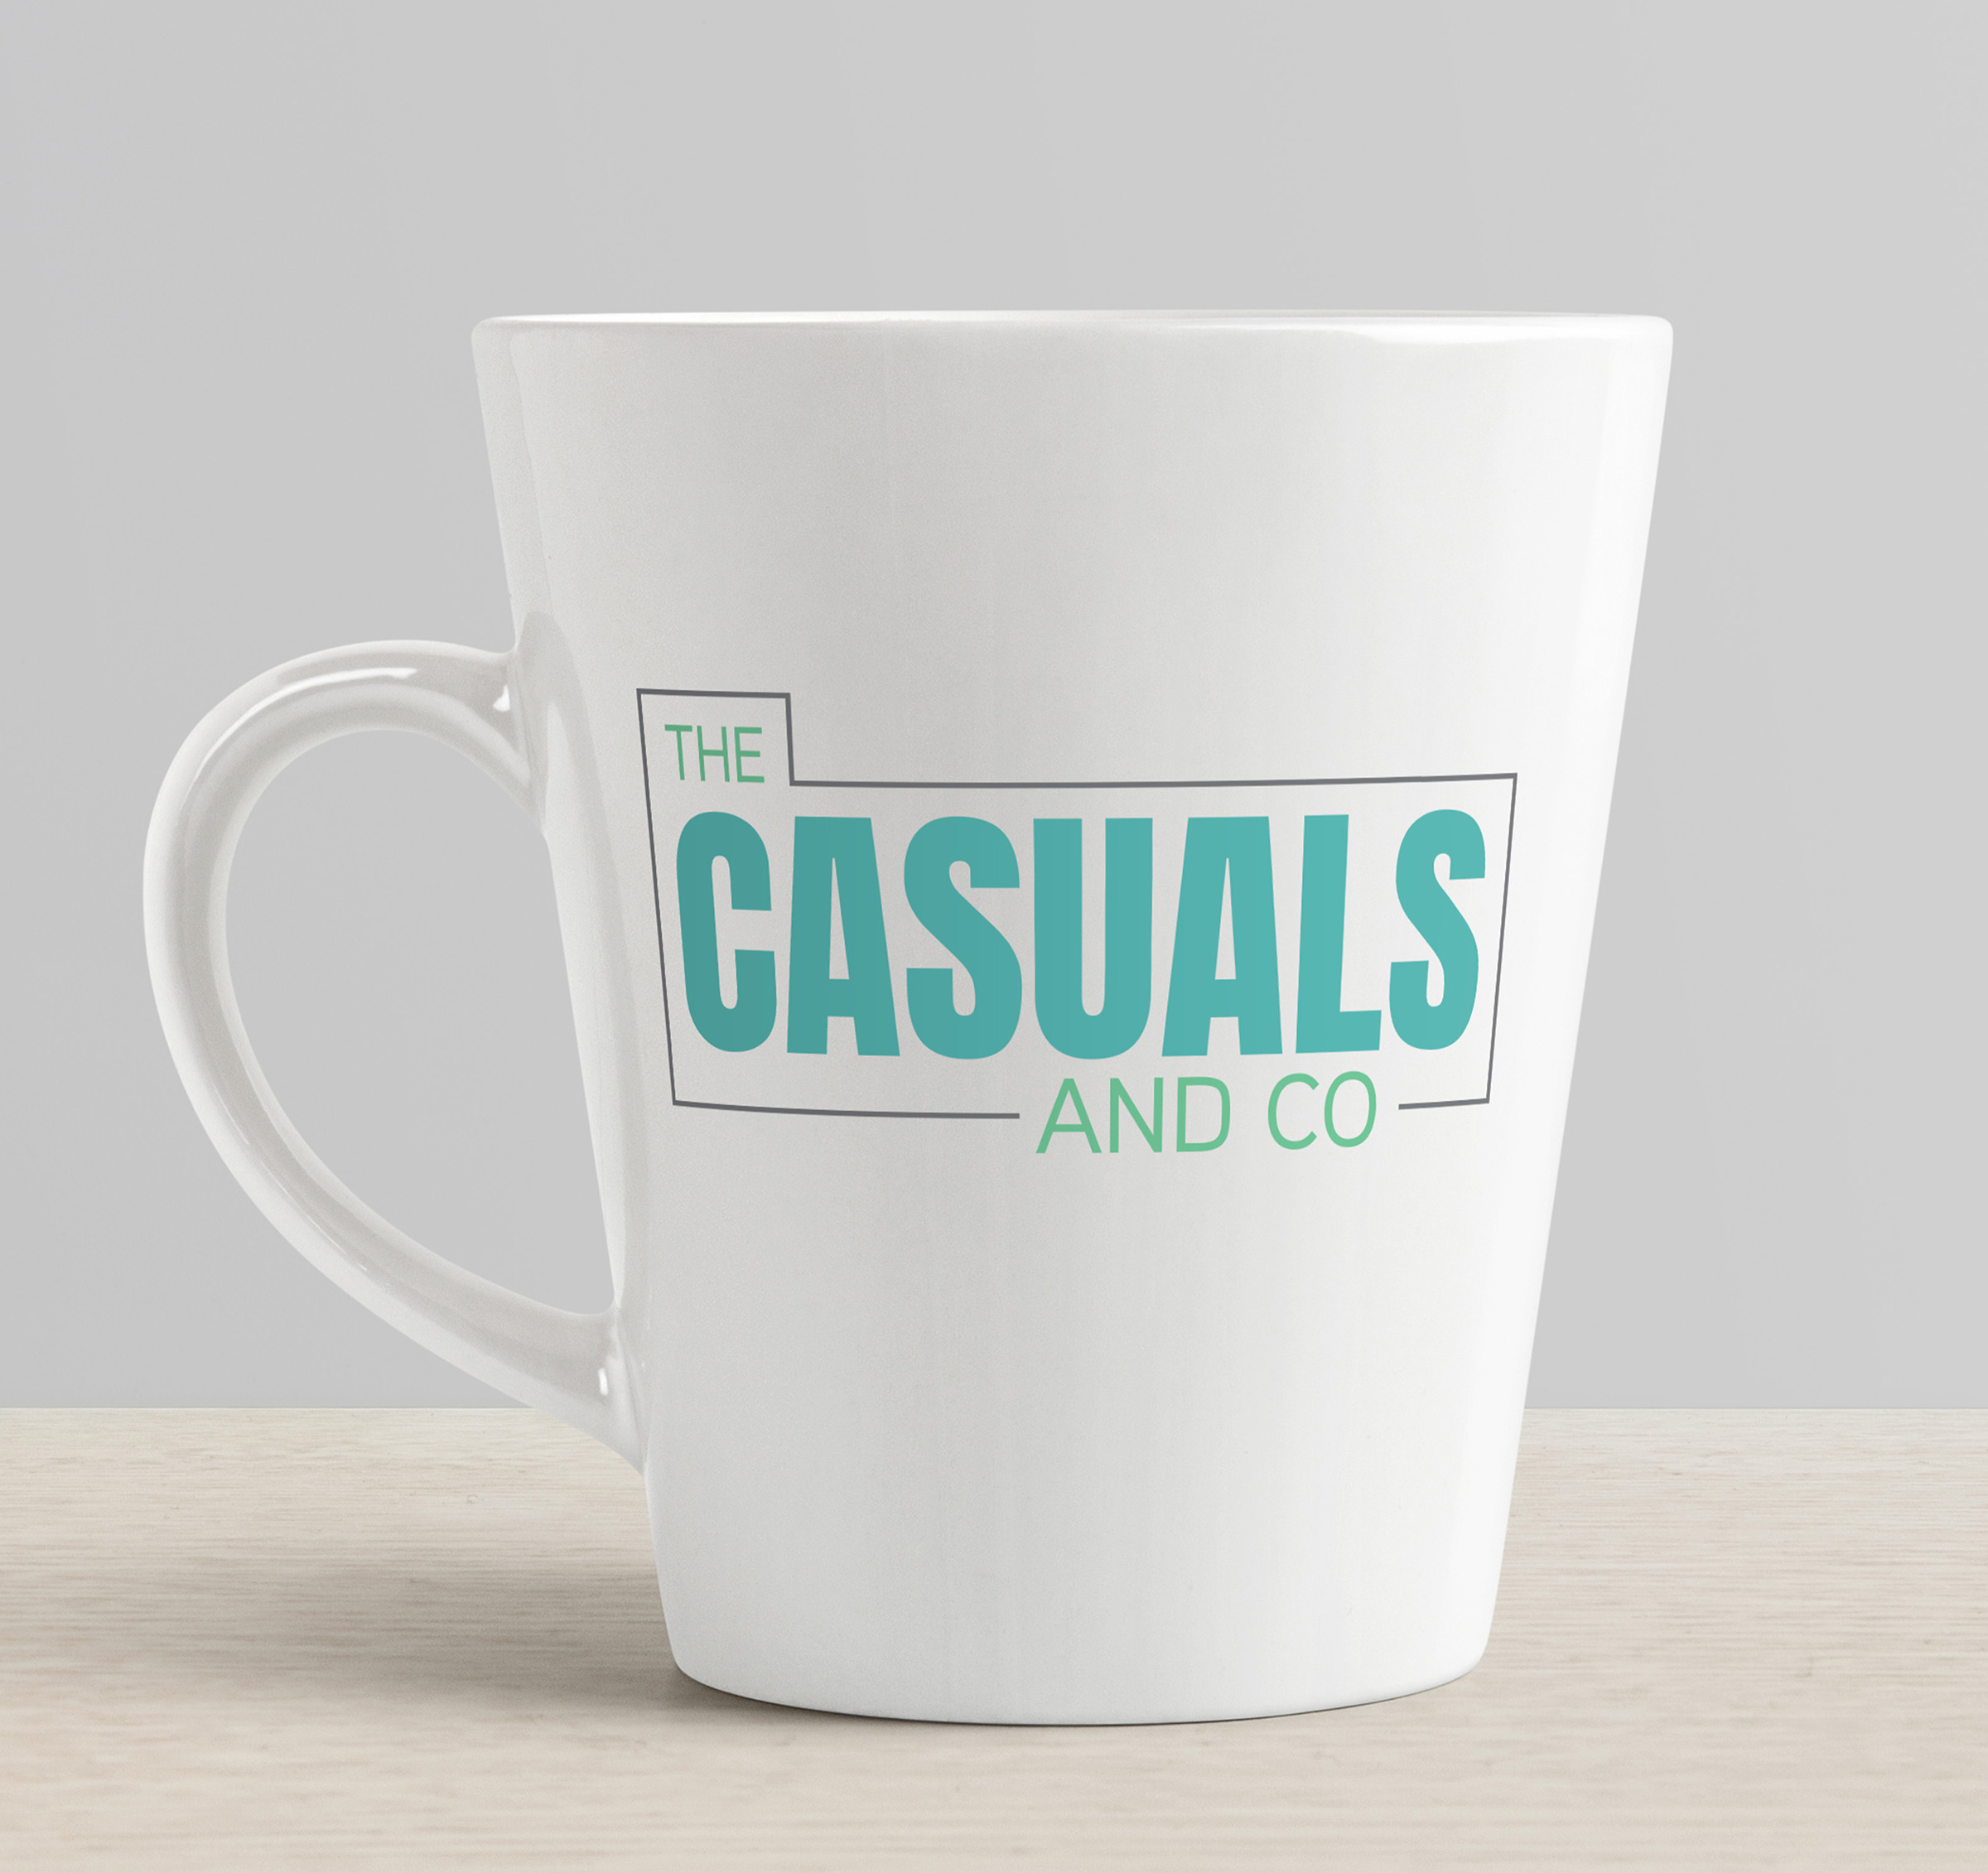 The Casuals and Company's Logo on a white mug